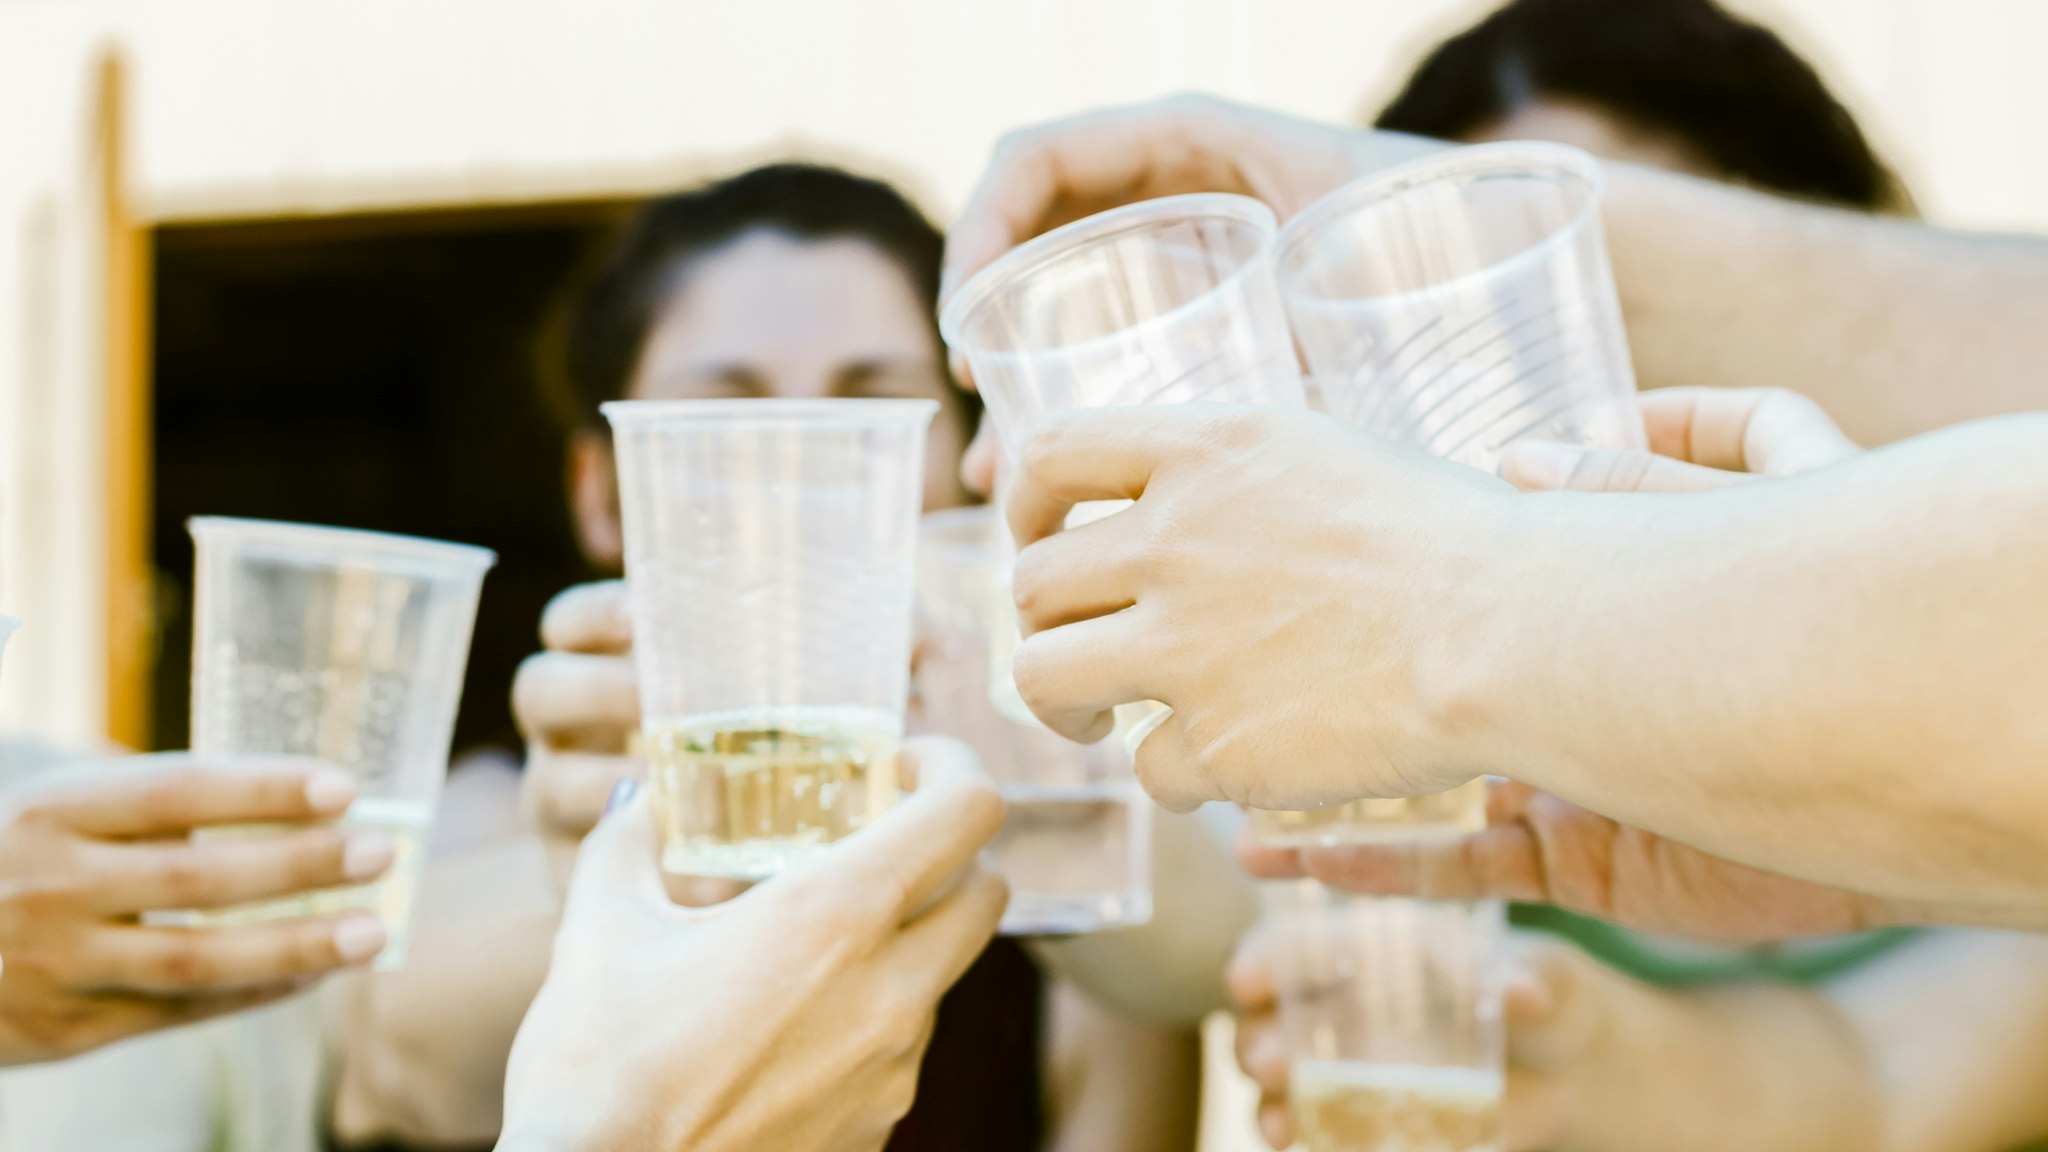 Group of people hands toasting - stock photo